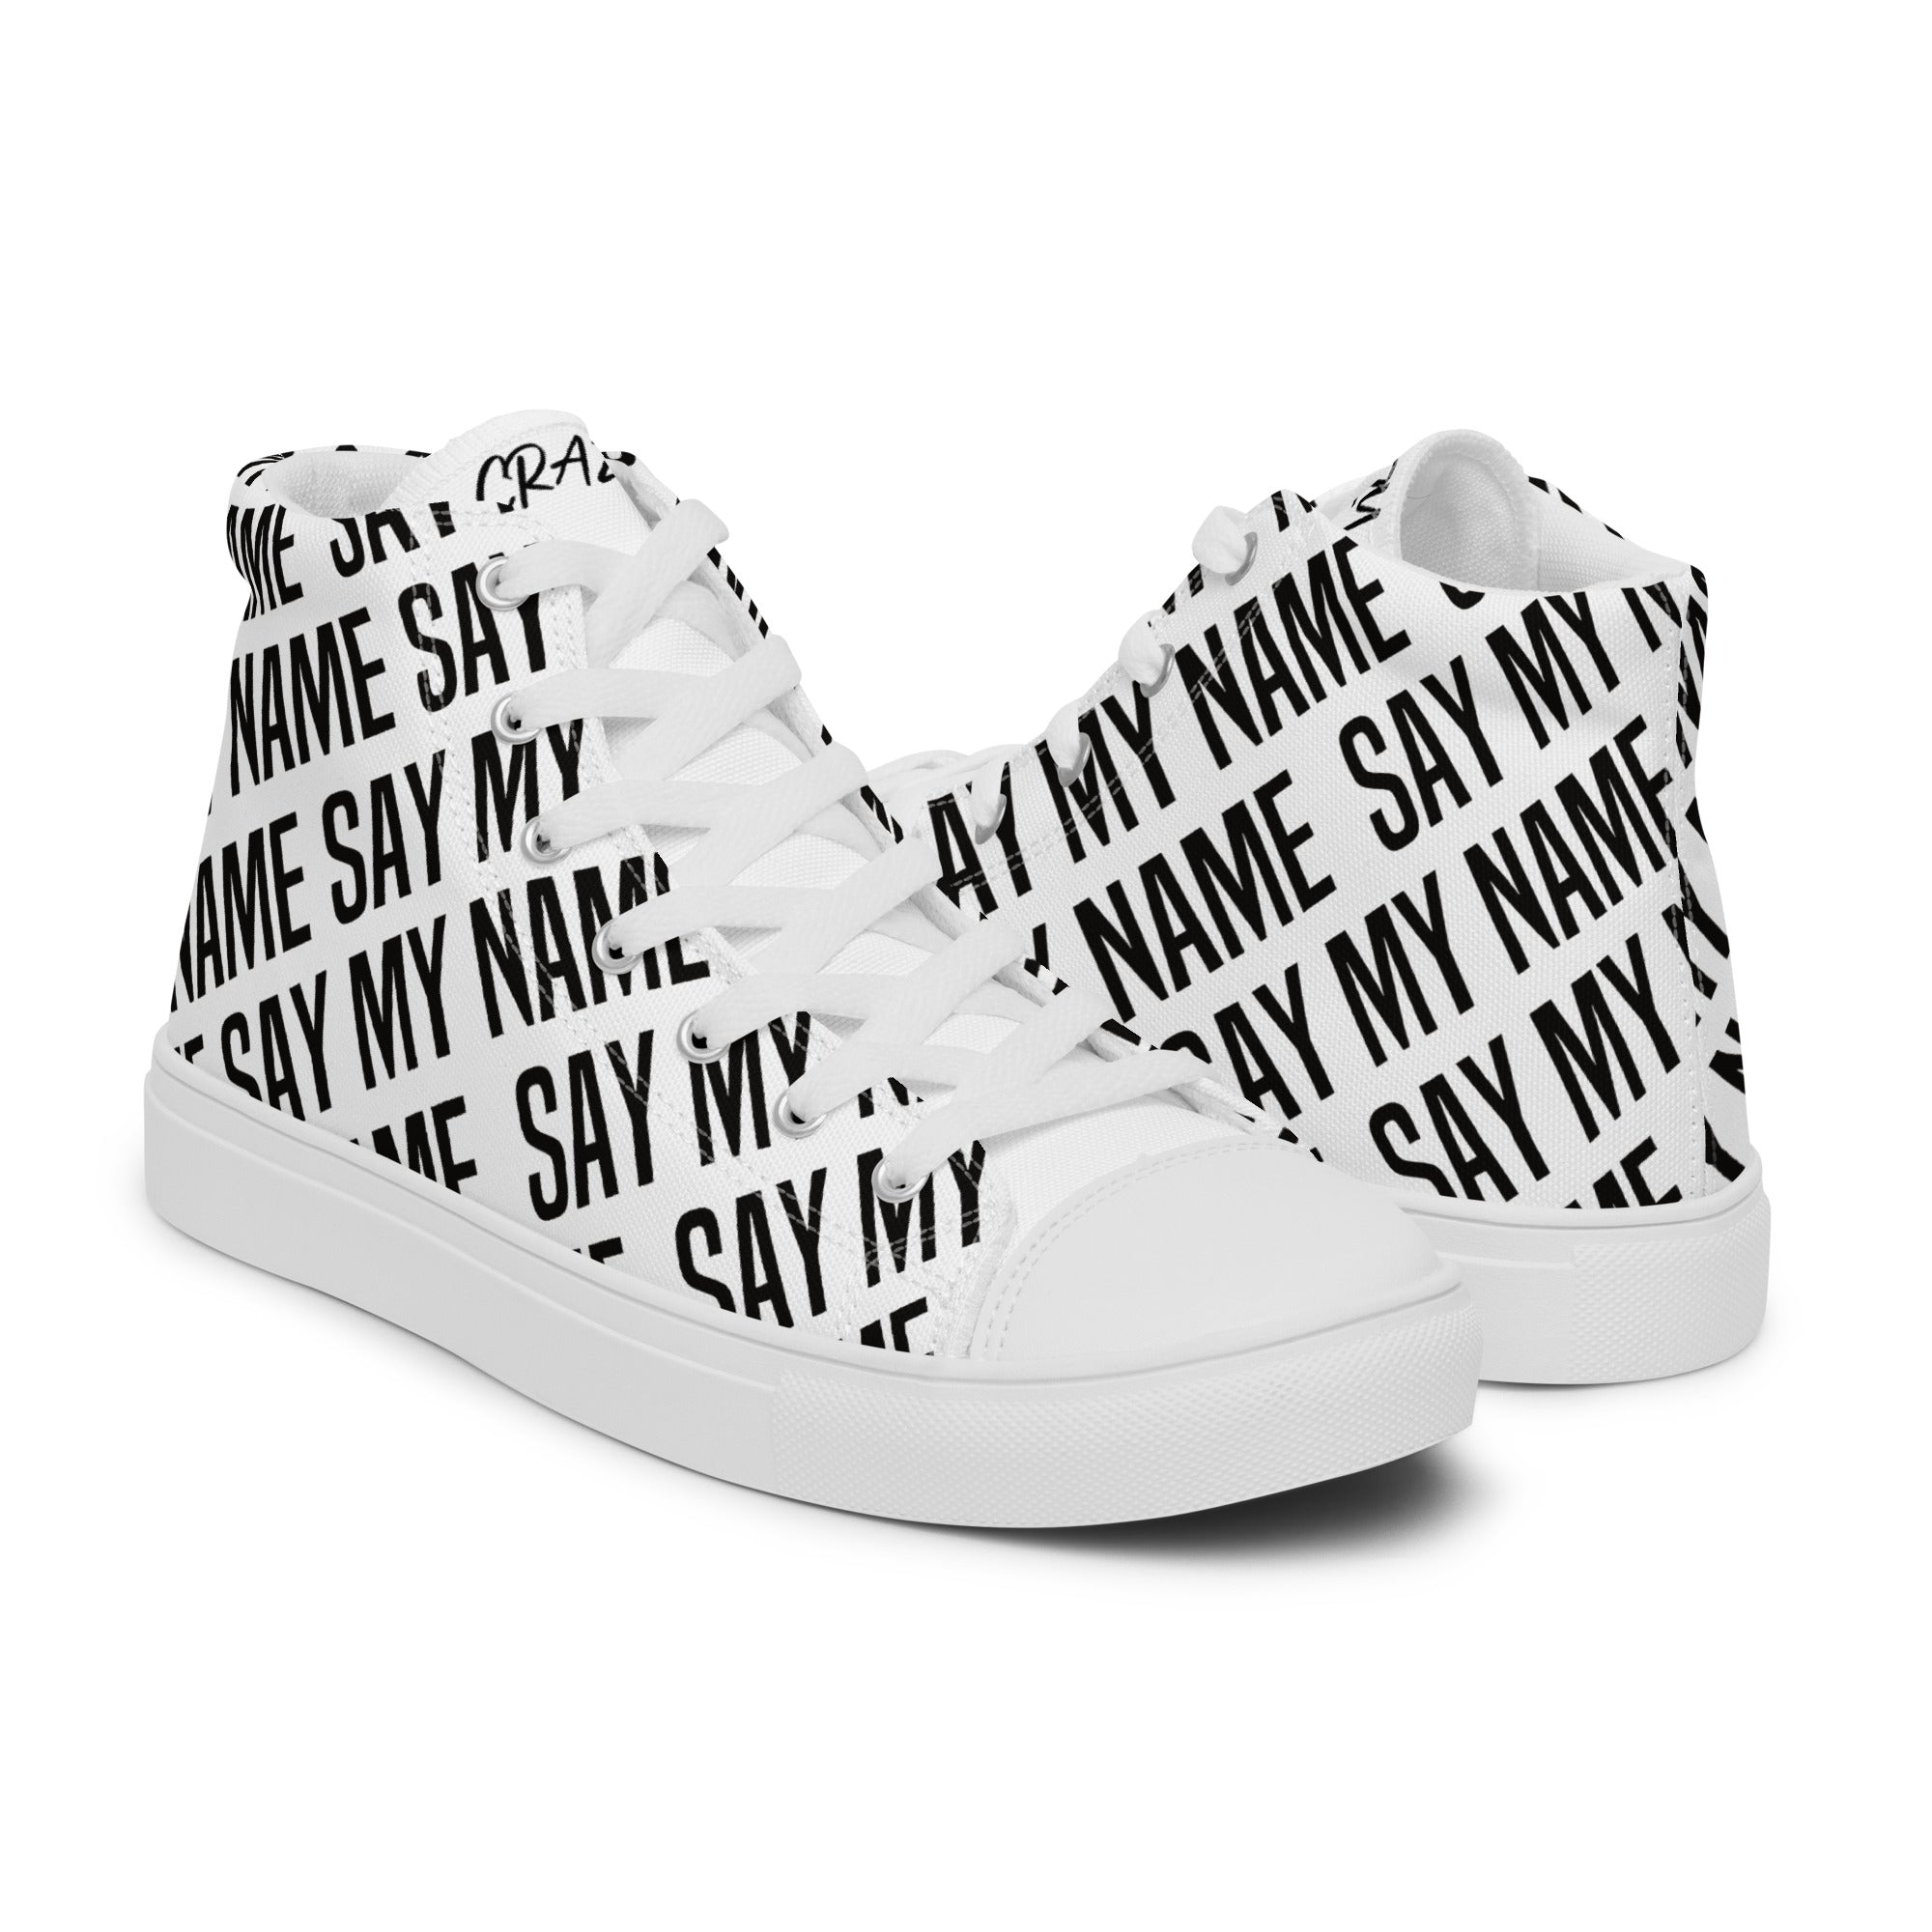 Baskets hautes blanches en toile  homme "SAY MY NAME" Multi